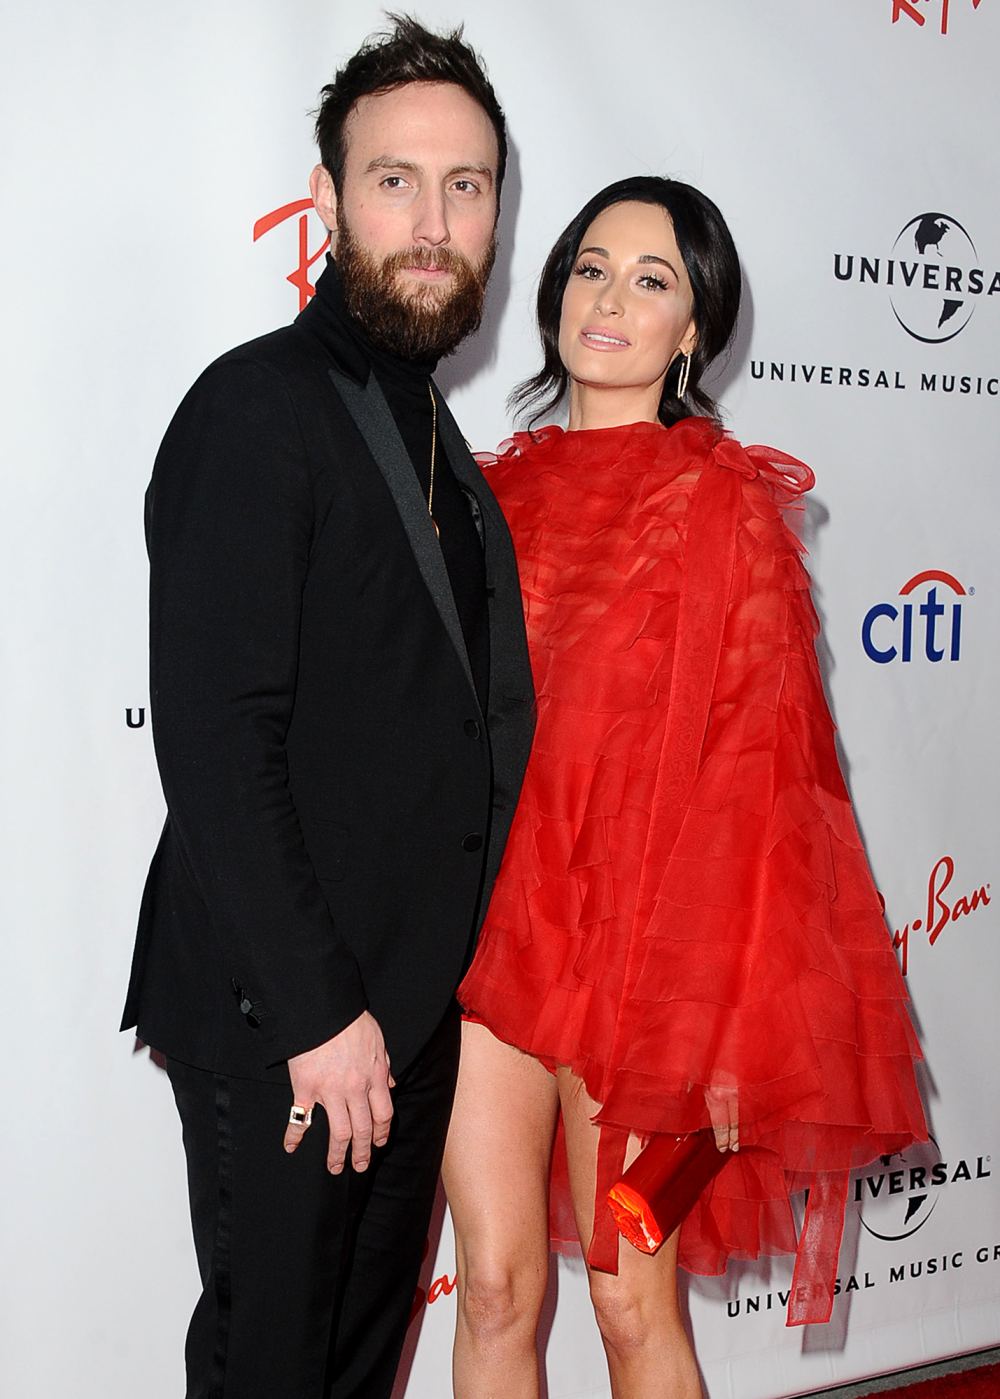 Kacey Musgraves’ Estranged Husband Ruston Kelly Teases ‘It Doesn’t Have to Be’ Over Amid Divorce